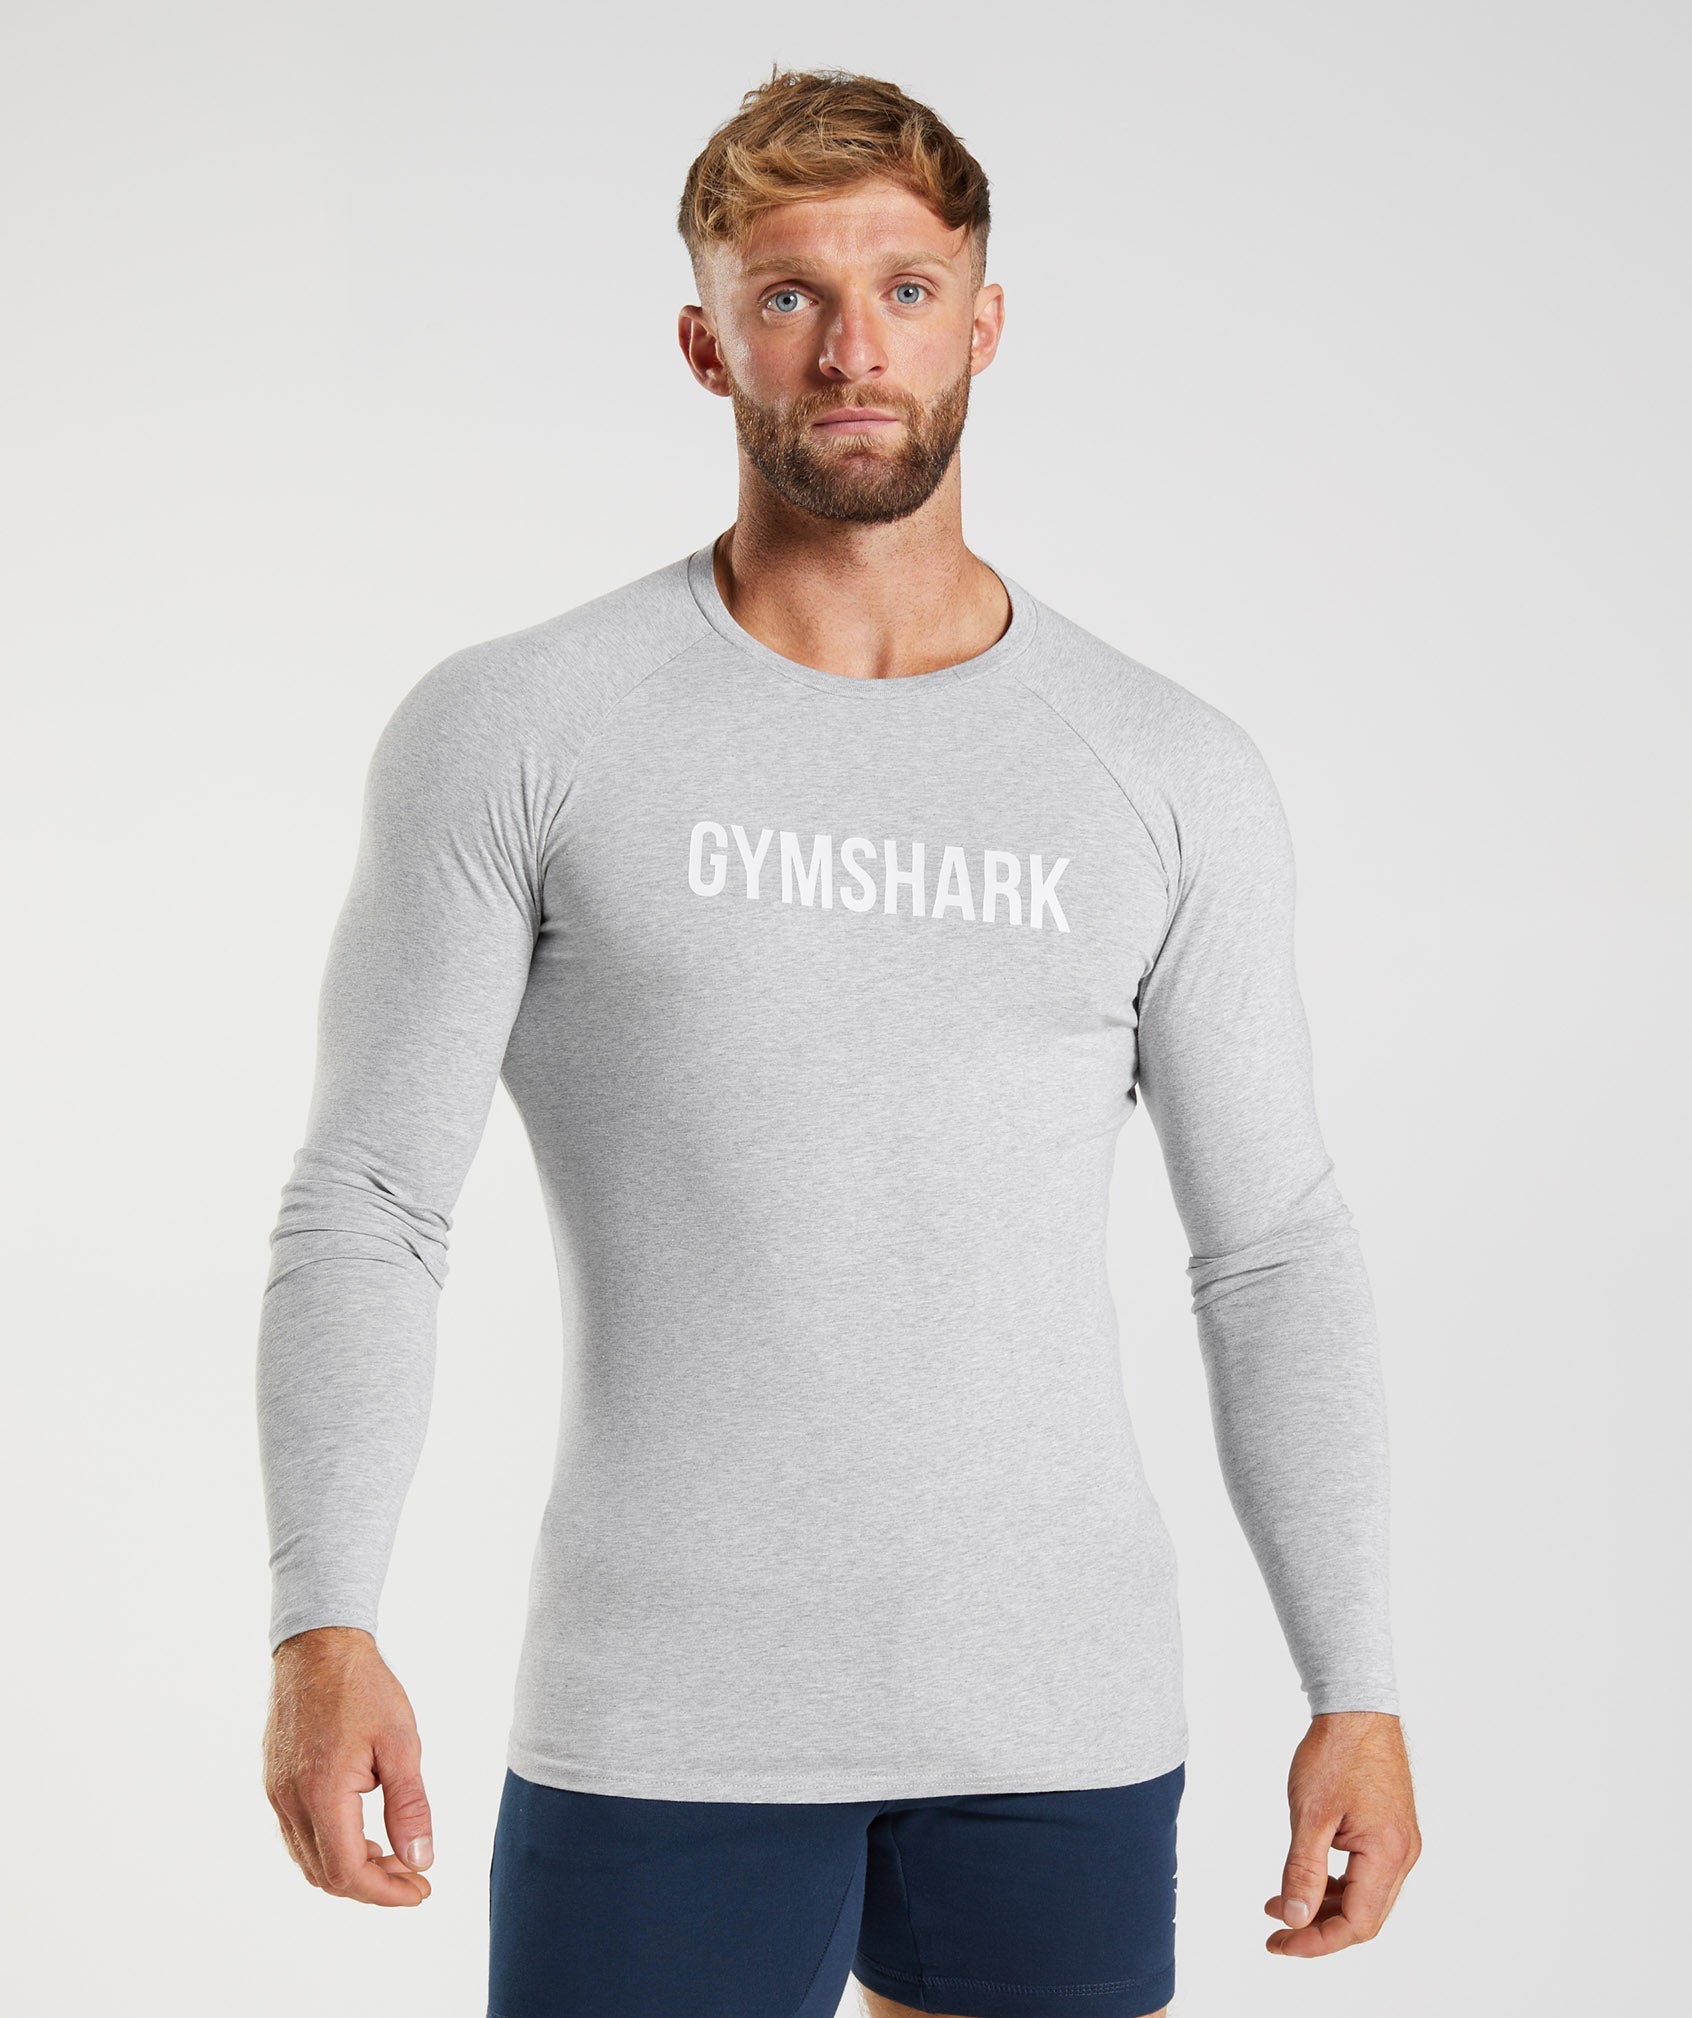 Apollo Long Sleeve T-Shirt in Light Grey Marl - view 1